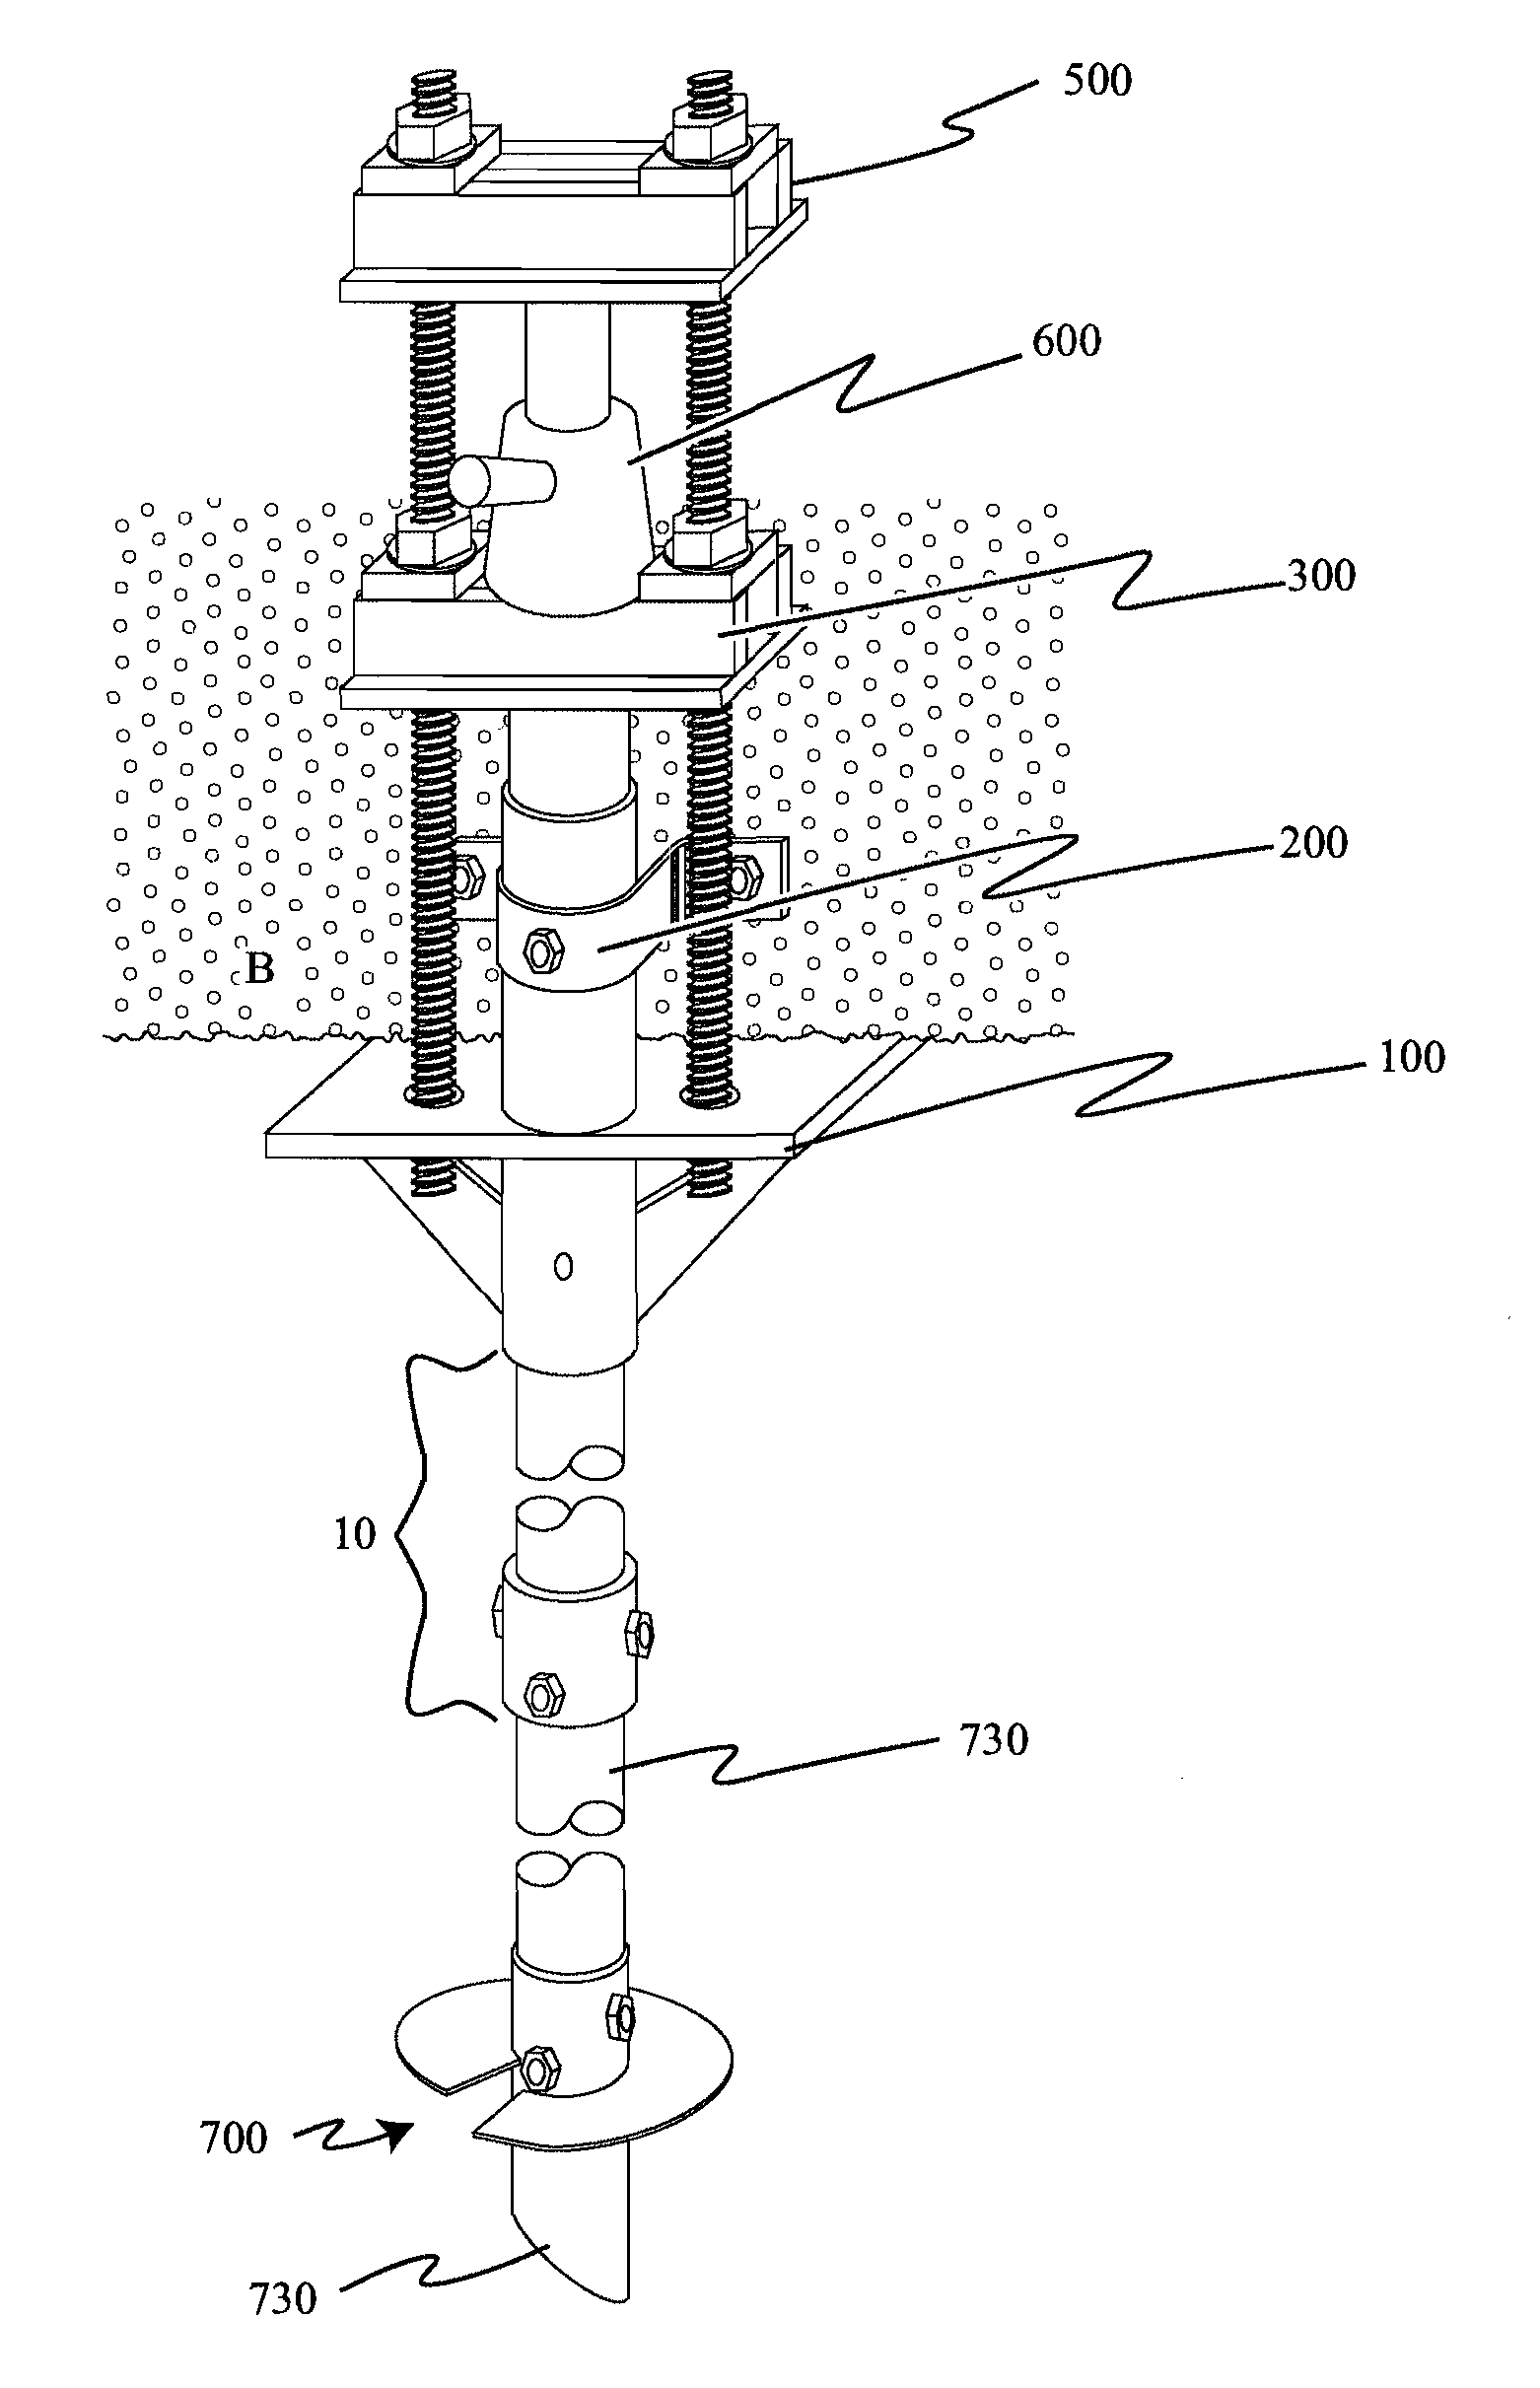 Apparatus for lifting building foundations